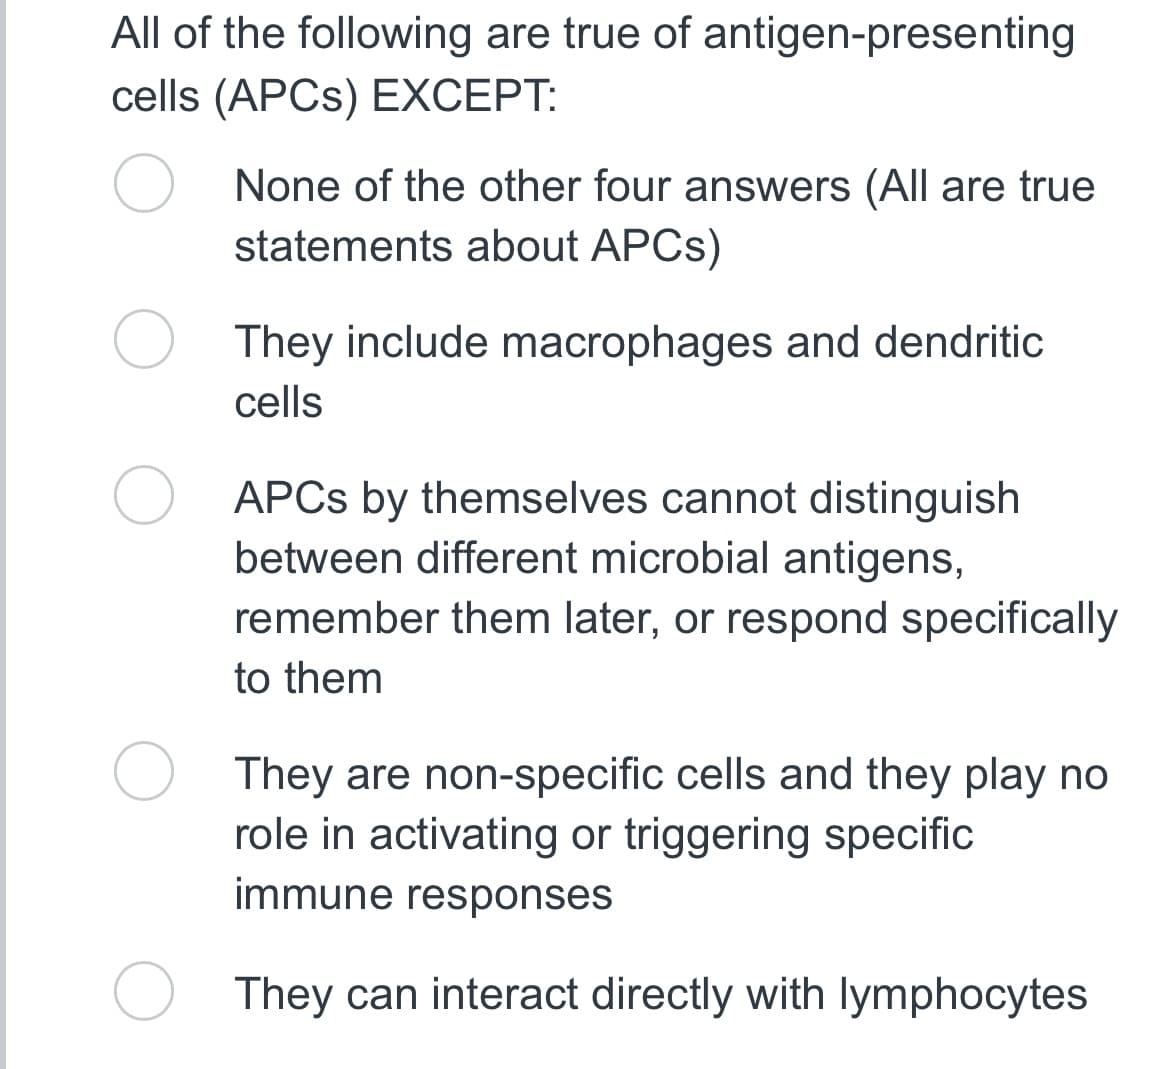 All of the following are true of antigen-presenting
cells (APCS) EXCEPT:
None of the other four answers (All are true
statements about APCs)
They include macrophages and dendritic
cells
APCs by themselves cannot distinguish
between different microbial antigens,
remember them later, or respond specifically
to them
They are non-specific cells and they play no
role in activating or triggering specific
immune responses
They can interact directly with lymphocytes